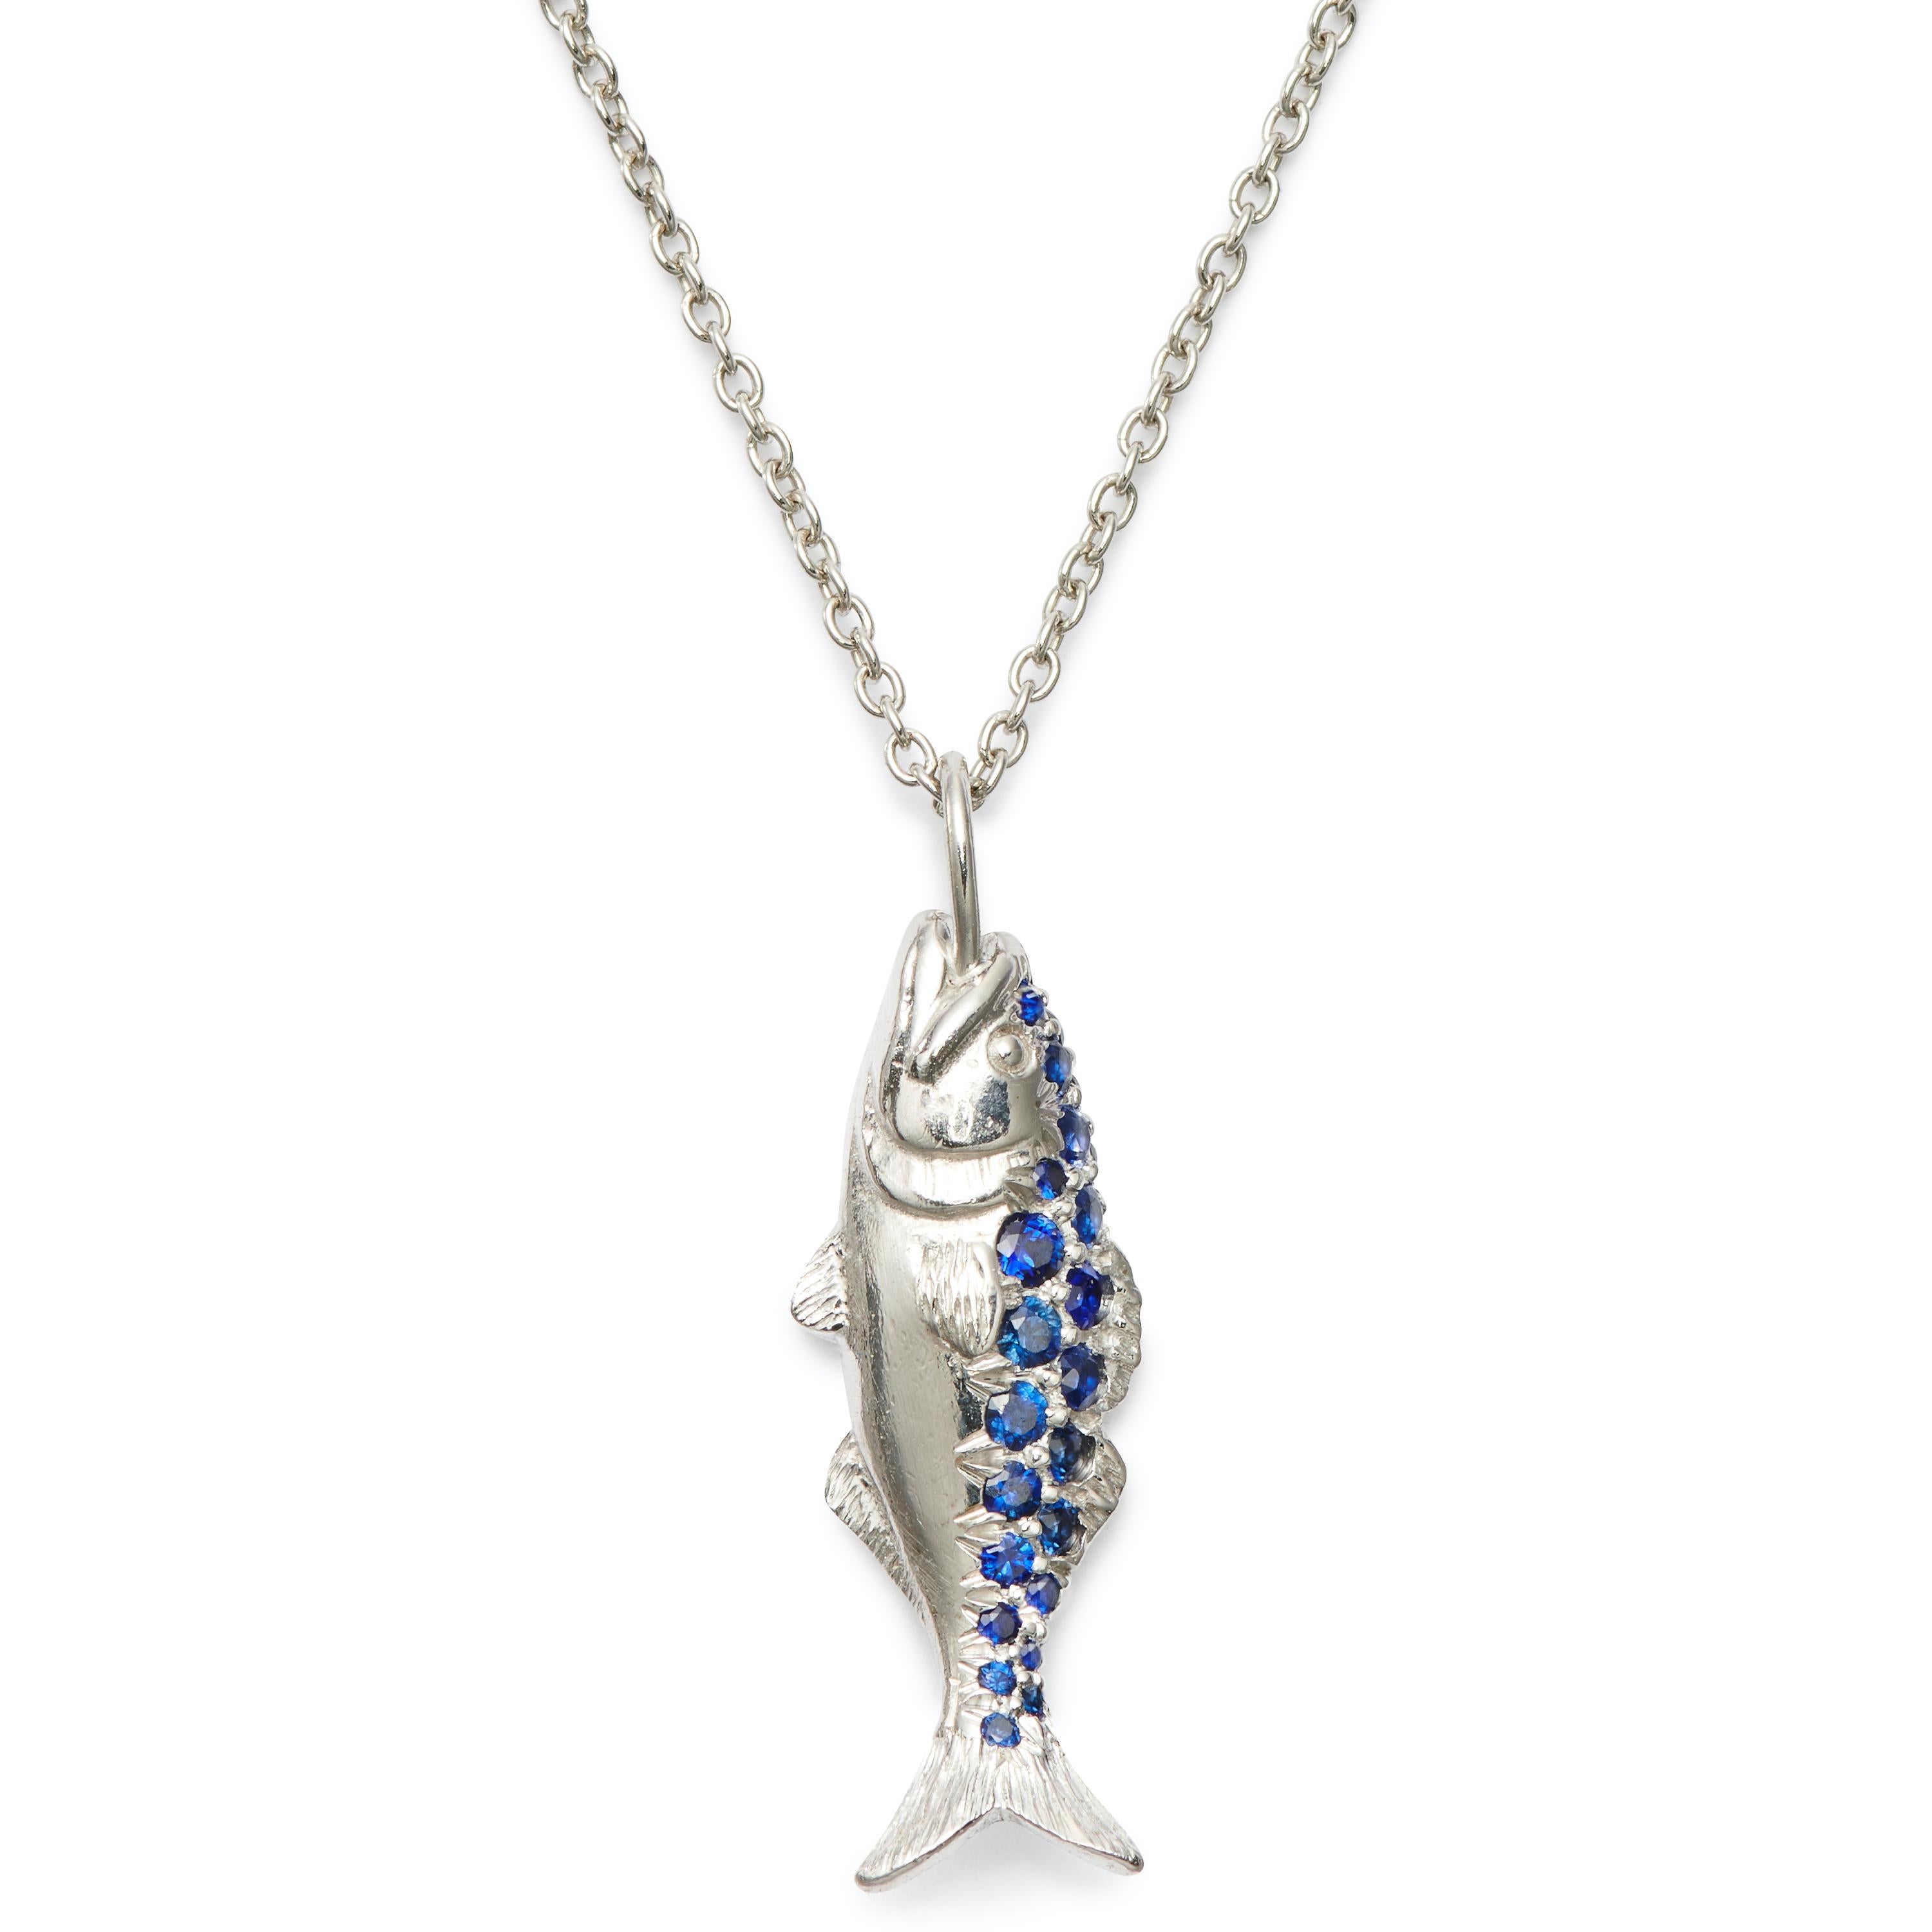 Blue Sapphires (0.61 Carat) shimmer like the sea in these 18 Karat Palladium White Gold Bluefish pendants. Available in two sizes, to be worn individually, together or with Tuna and Striped Bass pendants from the collection. 

18kt Gold clasp and